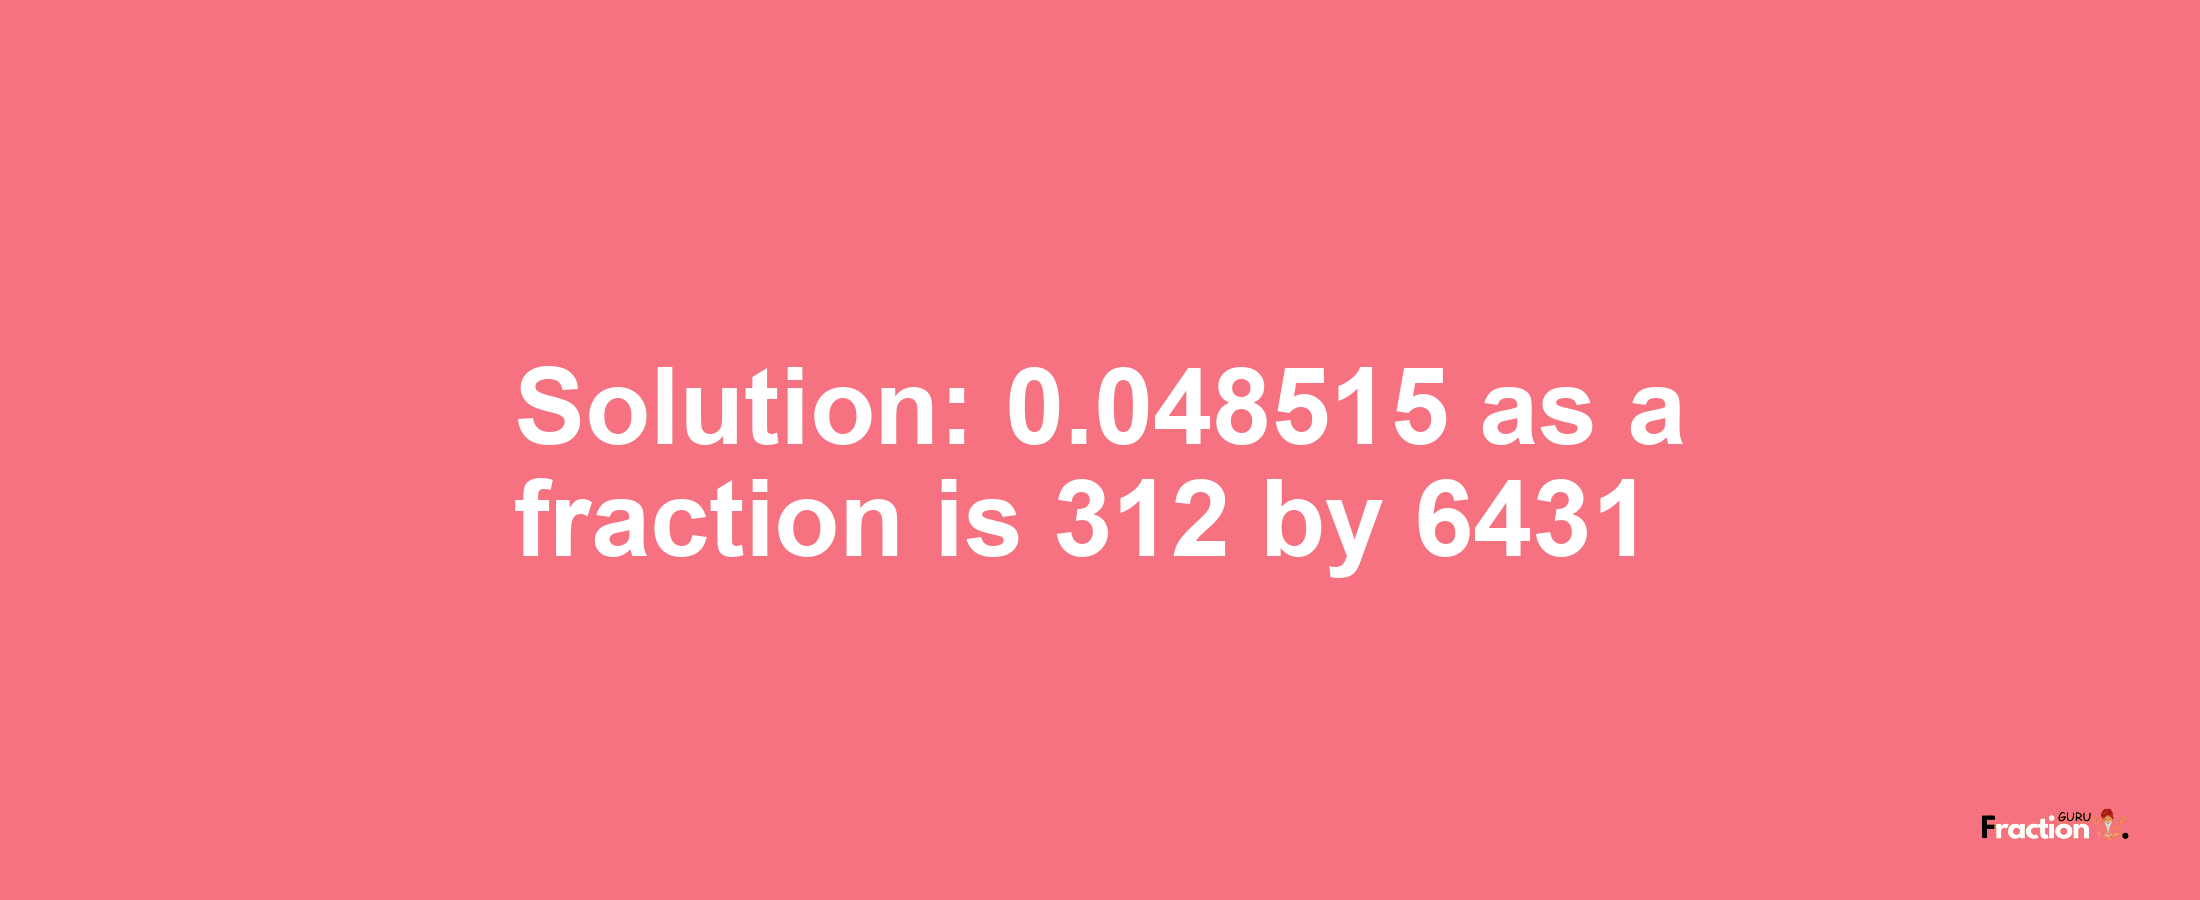 Solution:0.048515 as a fraction is 312/6431